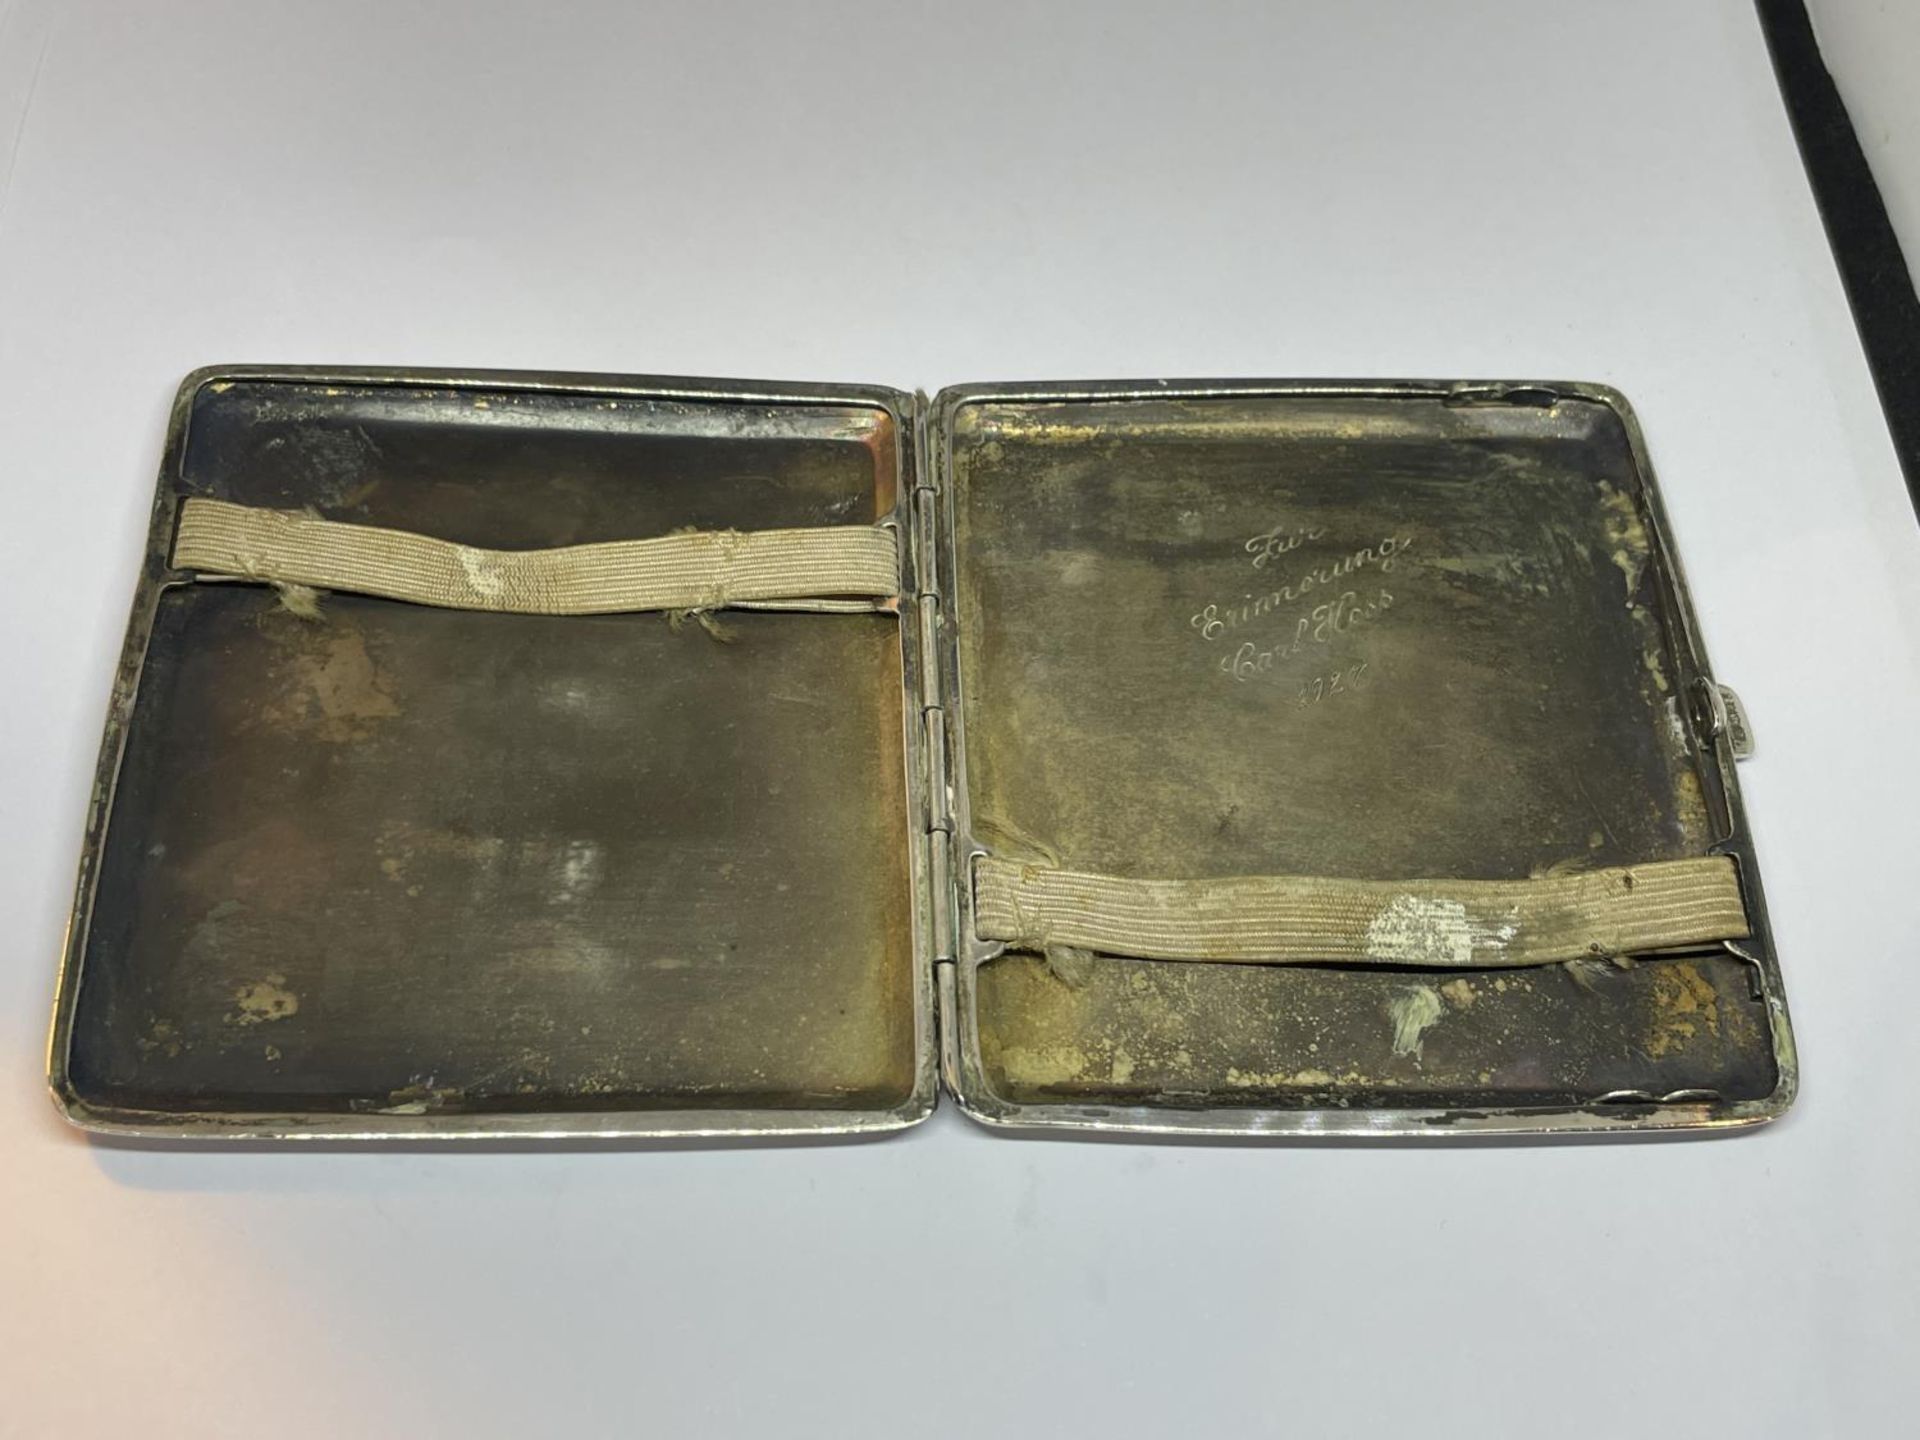 A MARKED 835 SILVER CIGARETTE CASE - Image 2 of 4